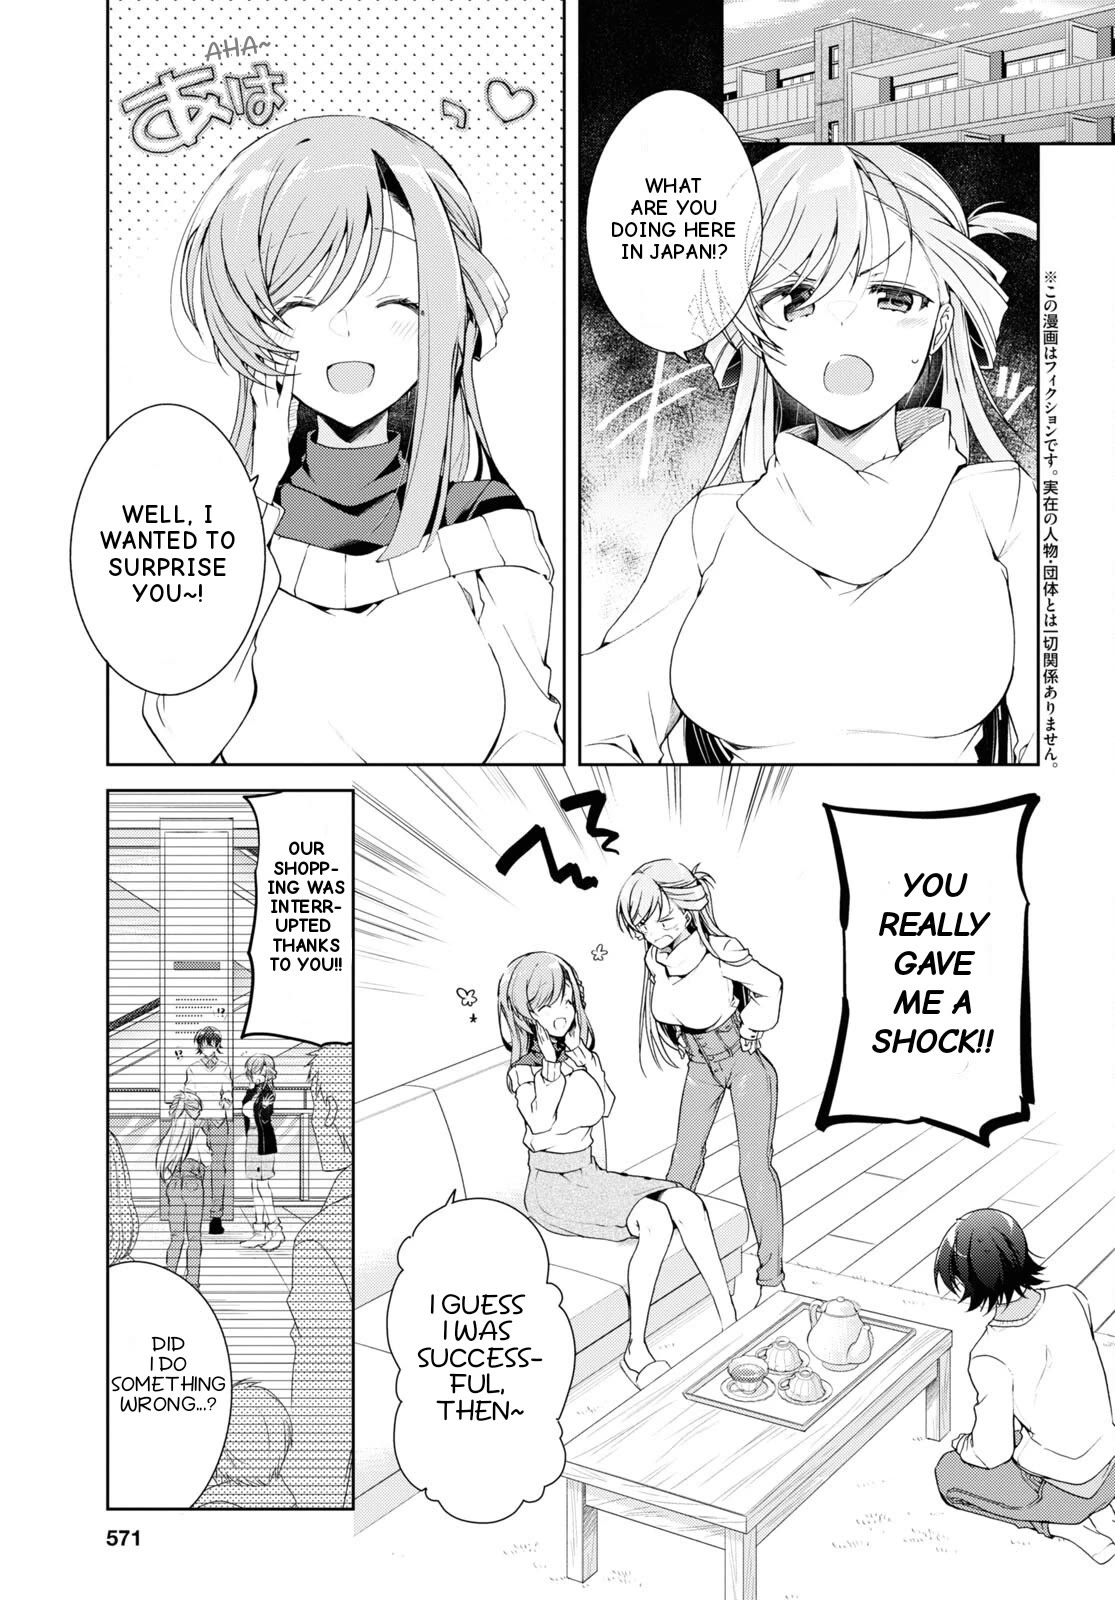 Isshiki-san Wants to Know About Love. - chapter 27 - #5